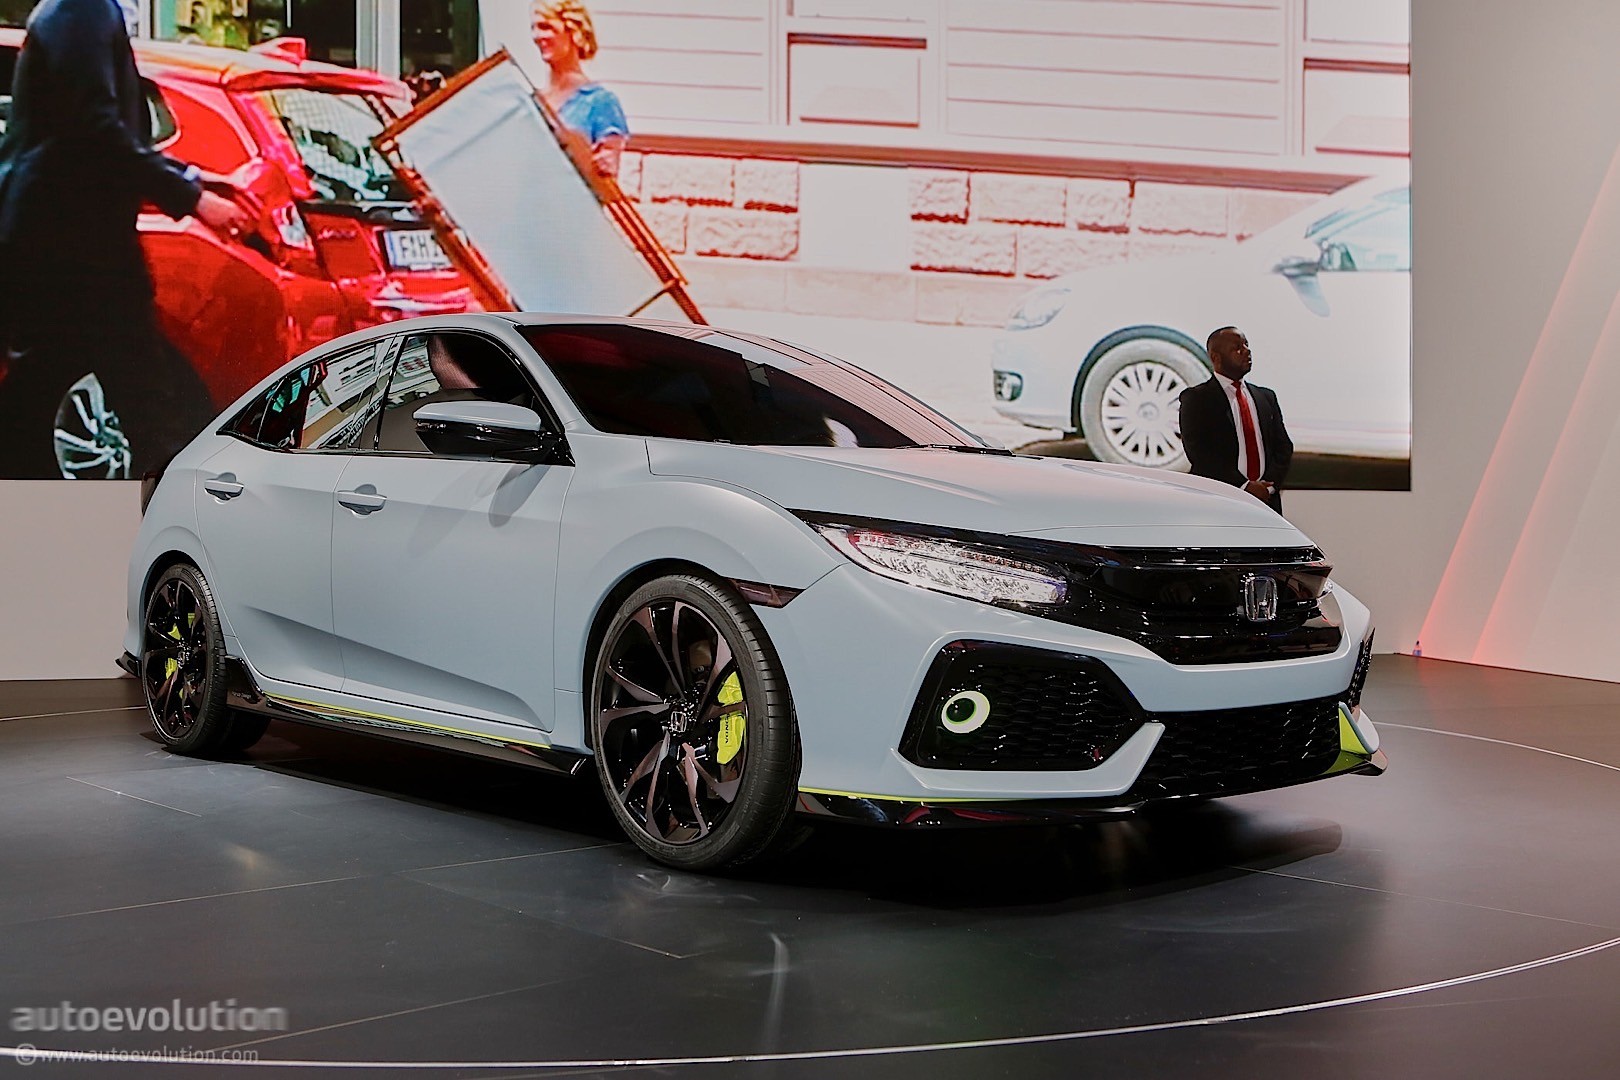 honda-civic-hatchback-coming-to-new-york-civic-si-and-new-type-r-in-2017_7.jpg